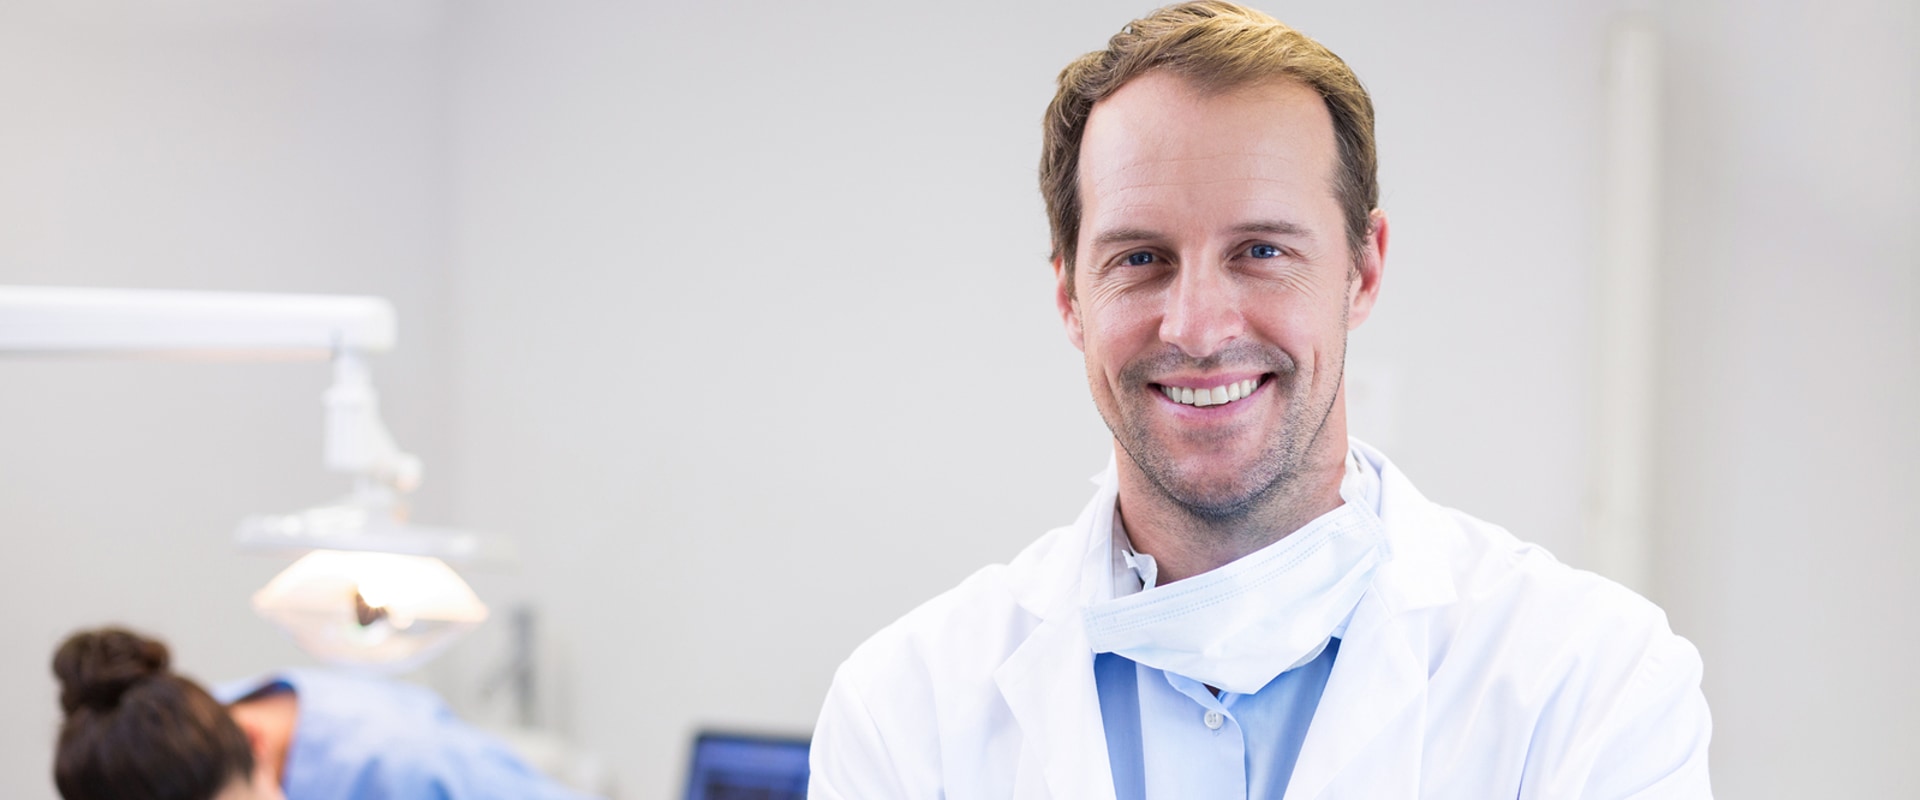 What kind of dentist is a prosthodontist?